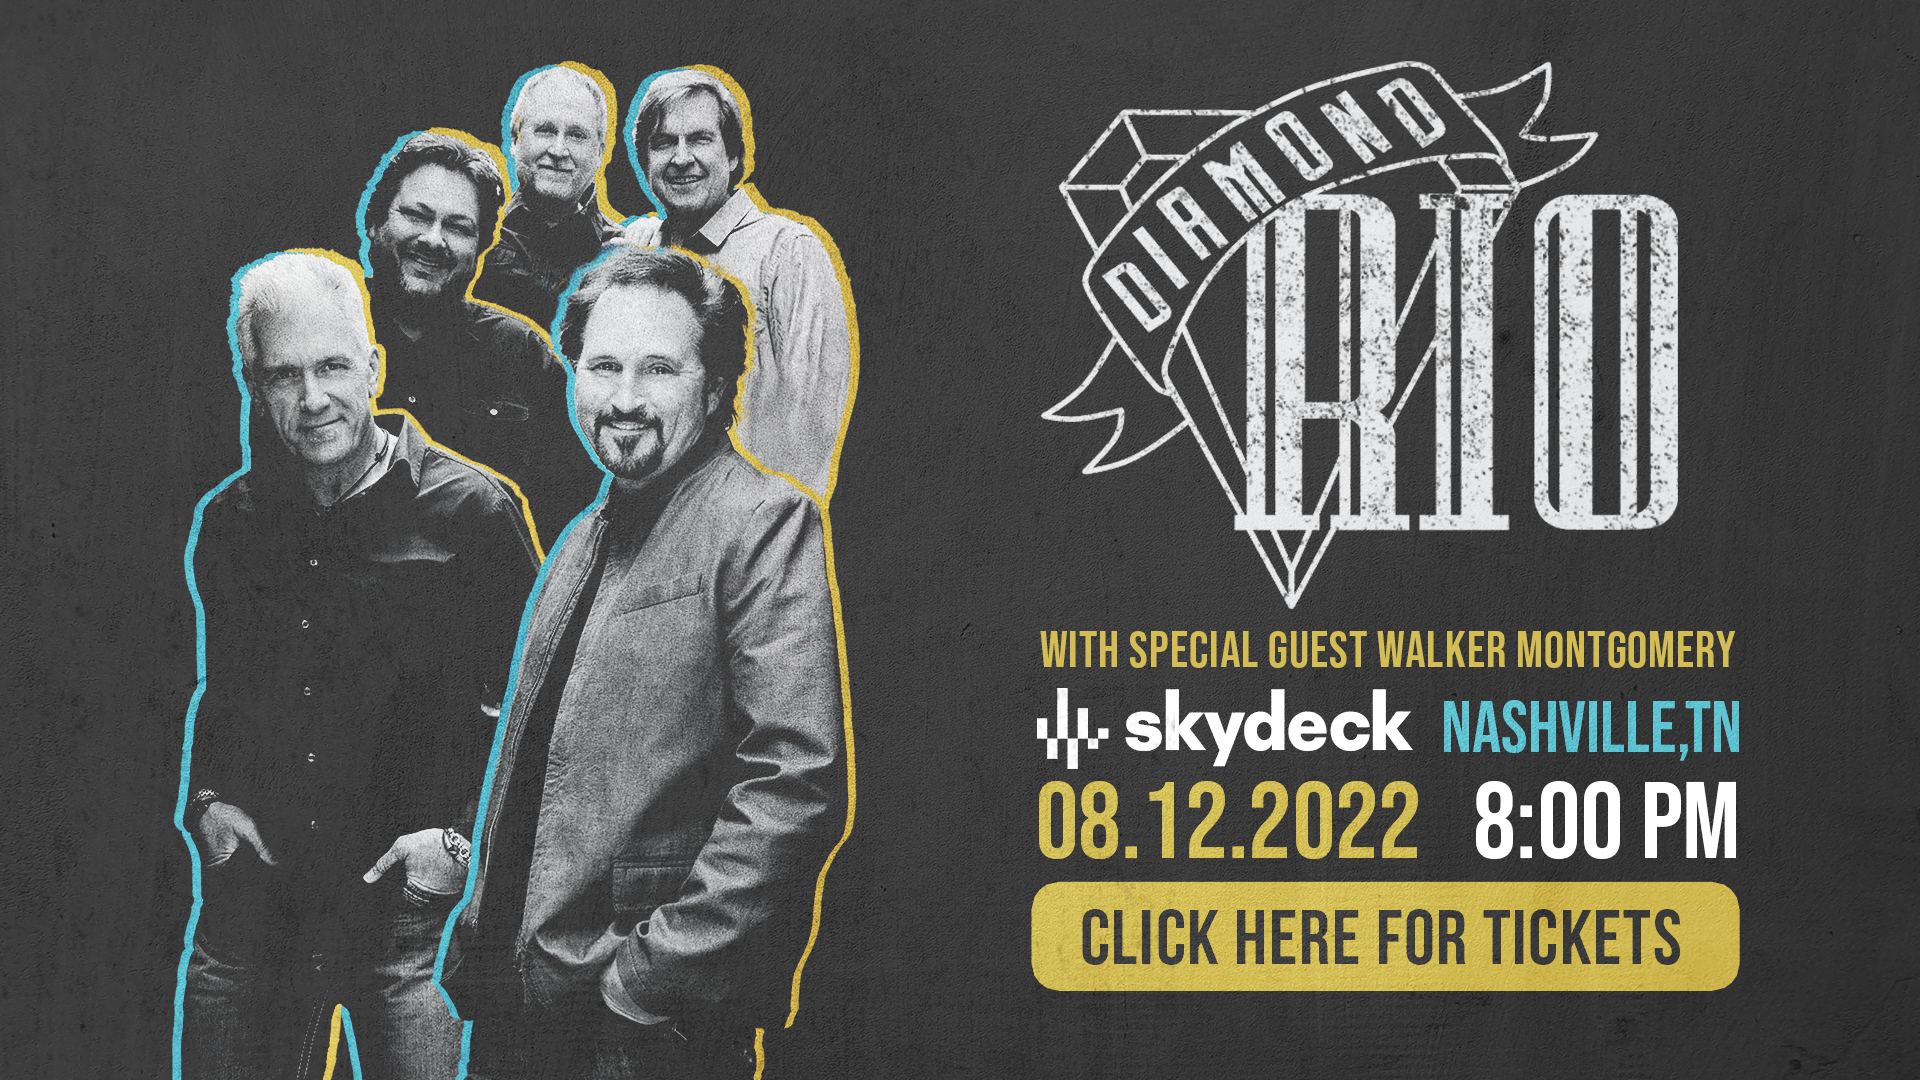 Diamond Rio with Special Guest Walker Montgomery on Skydeck - hero